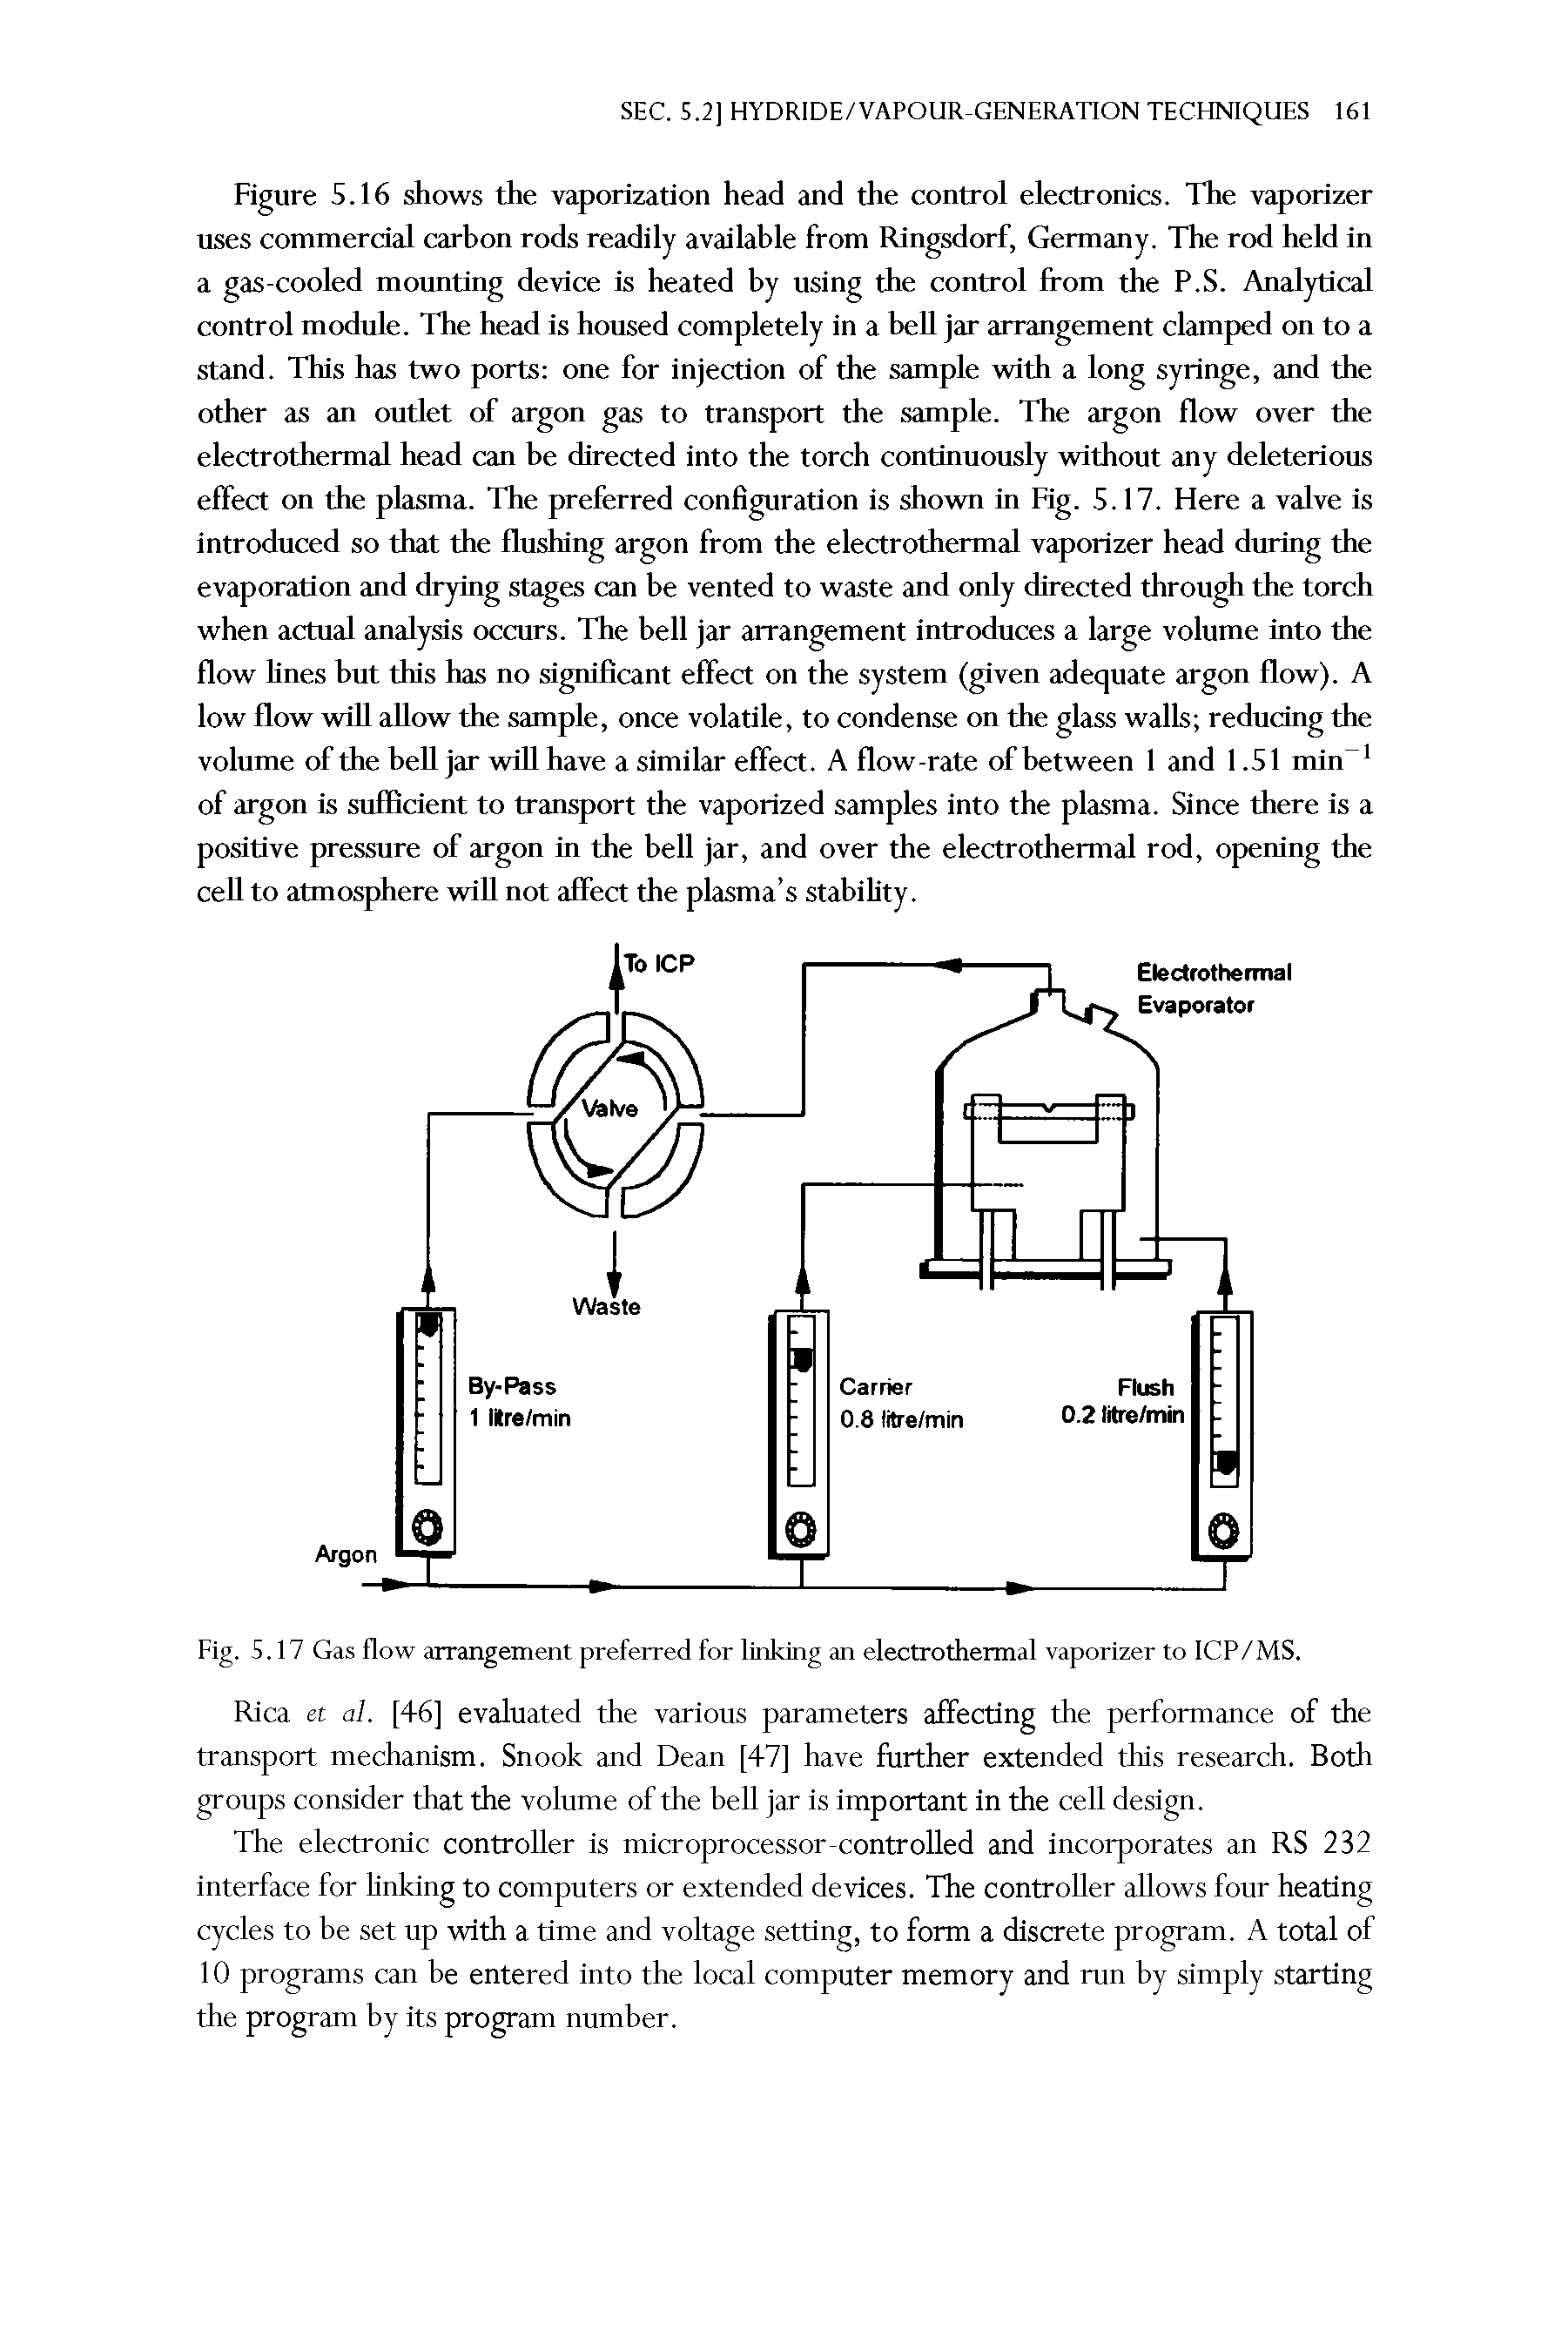 Fig. 5.17 Gas flow arrangement preferred for linking an electrothermal vaporizer to ICP/MS.